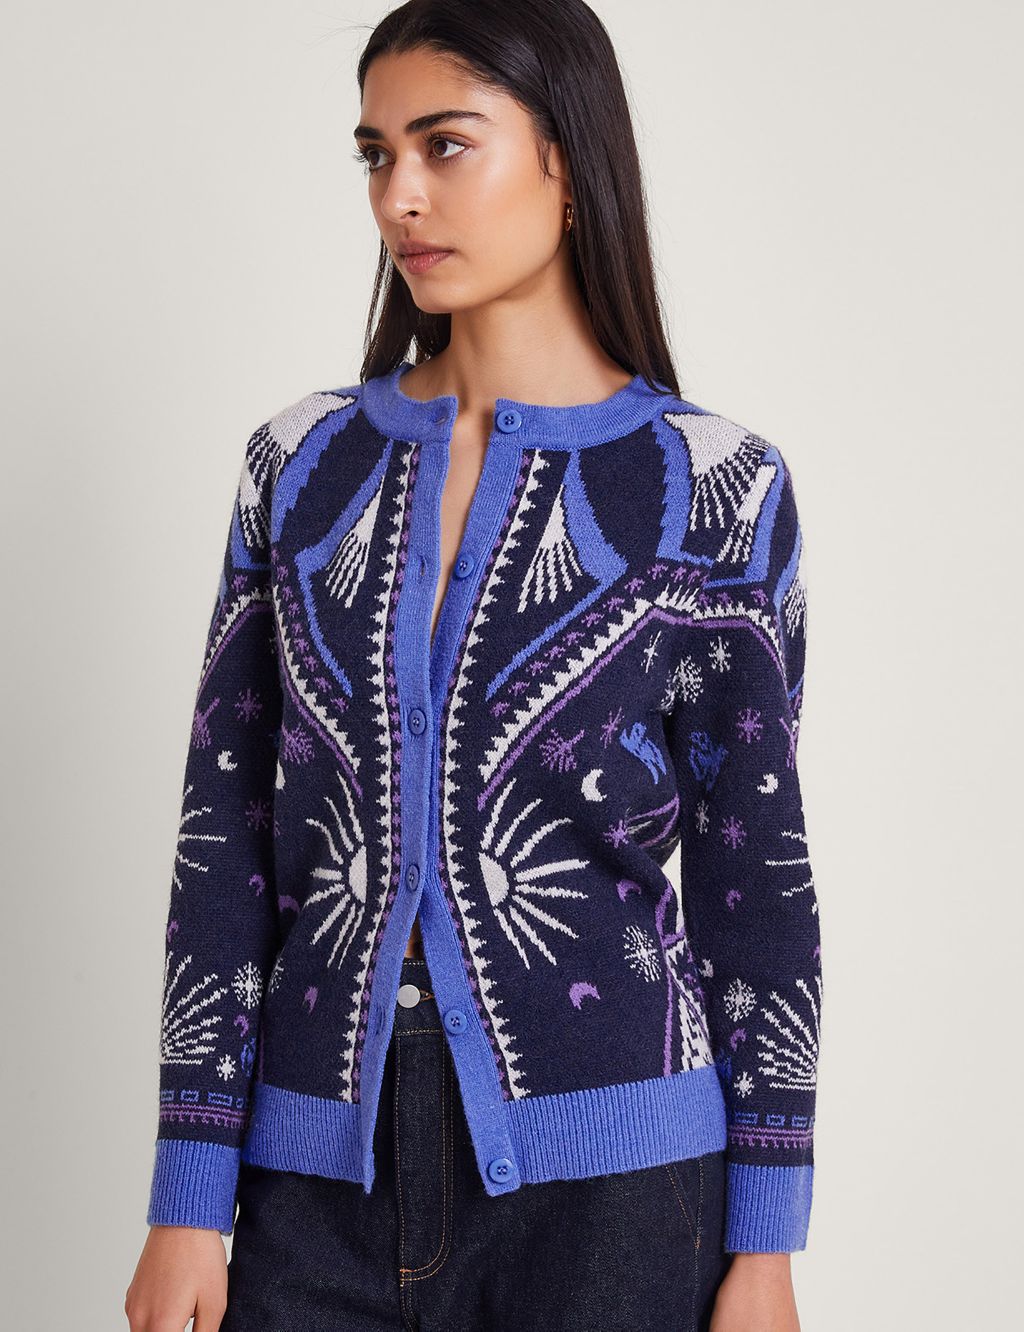 Sun and Moon Patterned Crew Neck Cardigan image 1